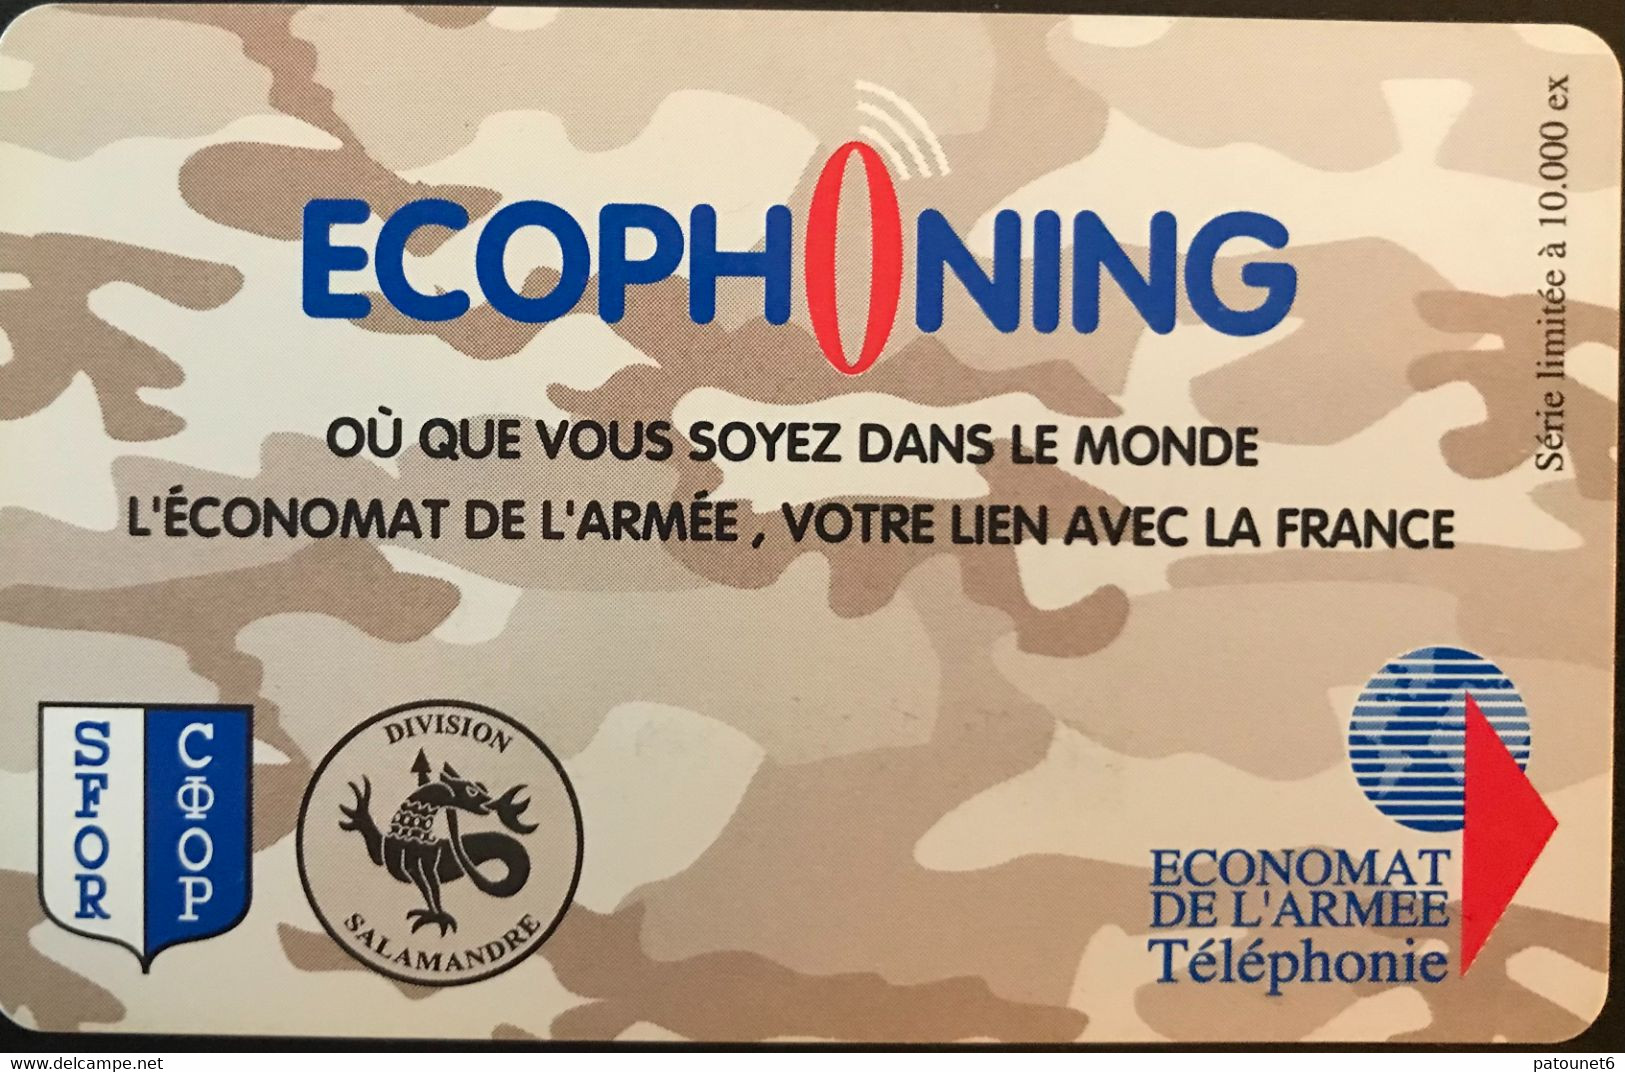 FRANCE  -  ARMEE  -  Prepaid  -  ECOPHONING  - SFOR - Division Salamandre - Marron Clair -  Schede Ad Uso Militare